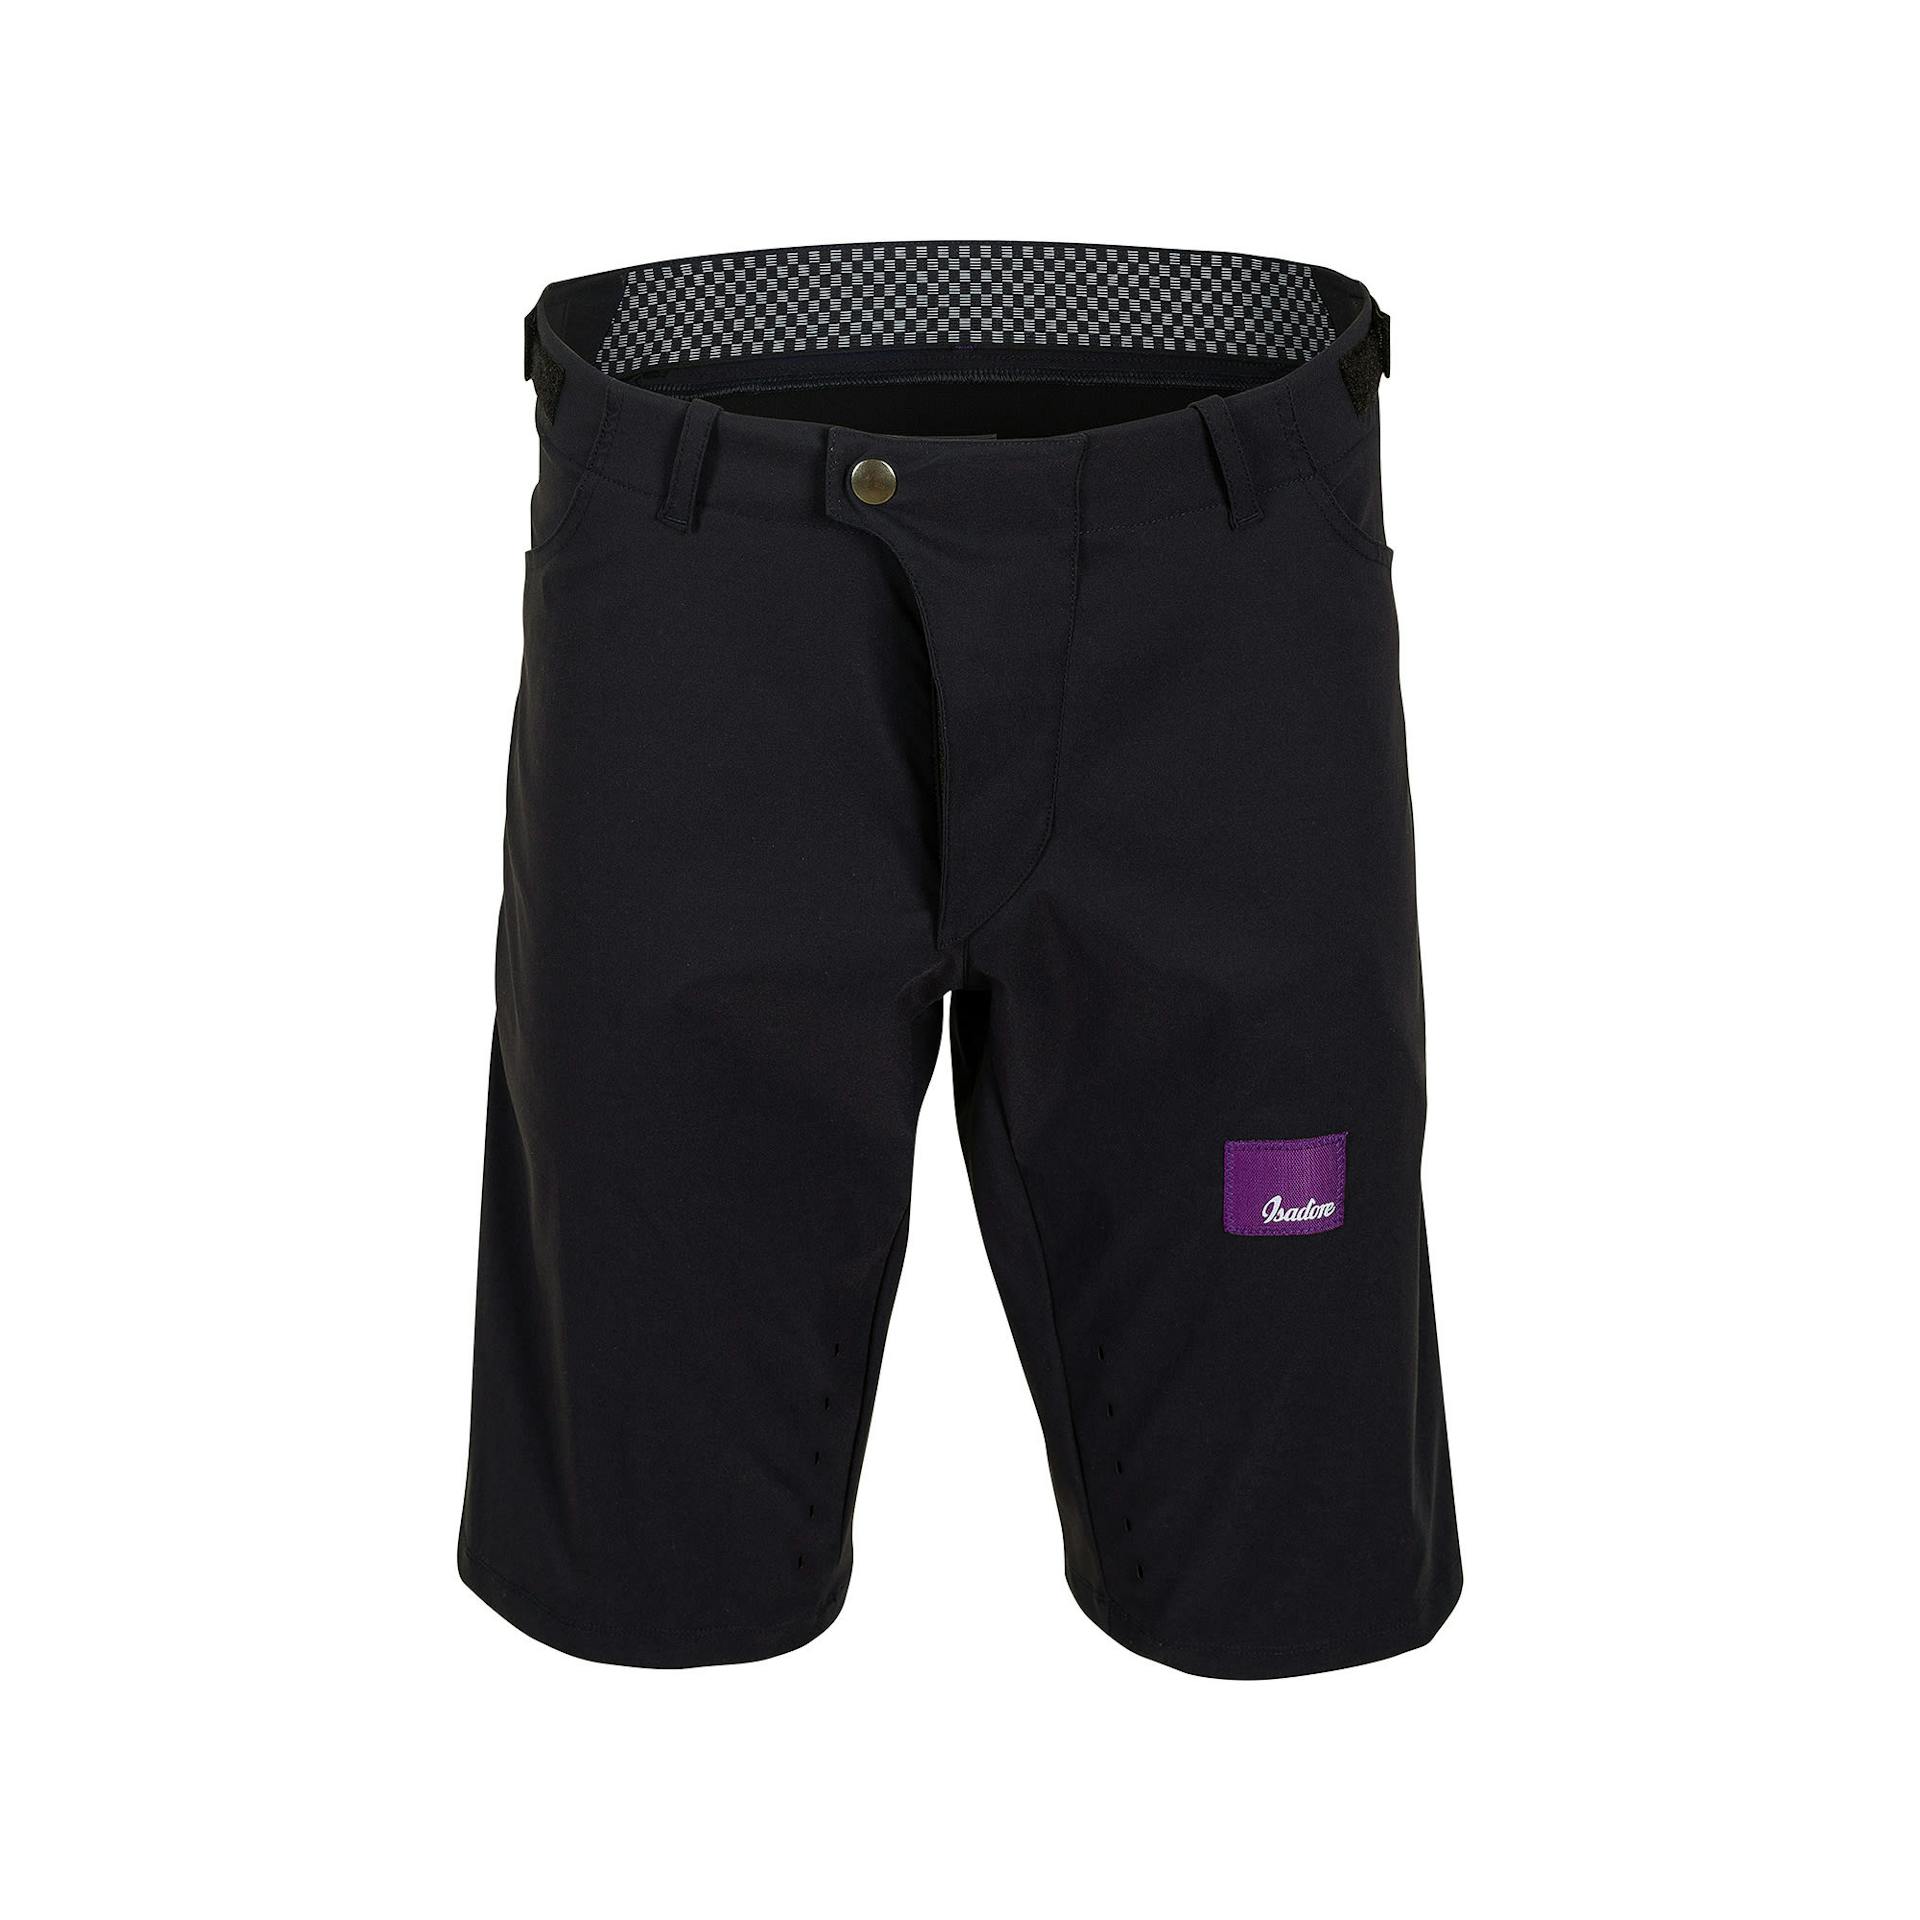 Off-road Shorts - Anthracite
                        